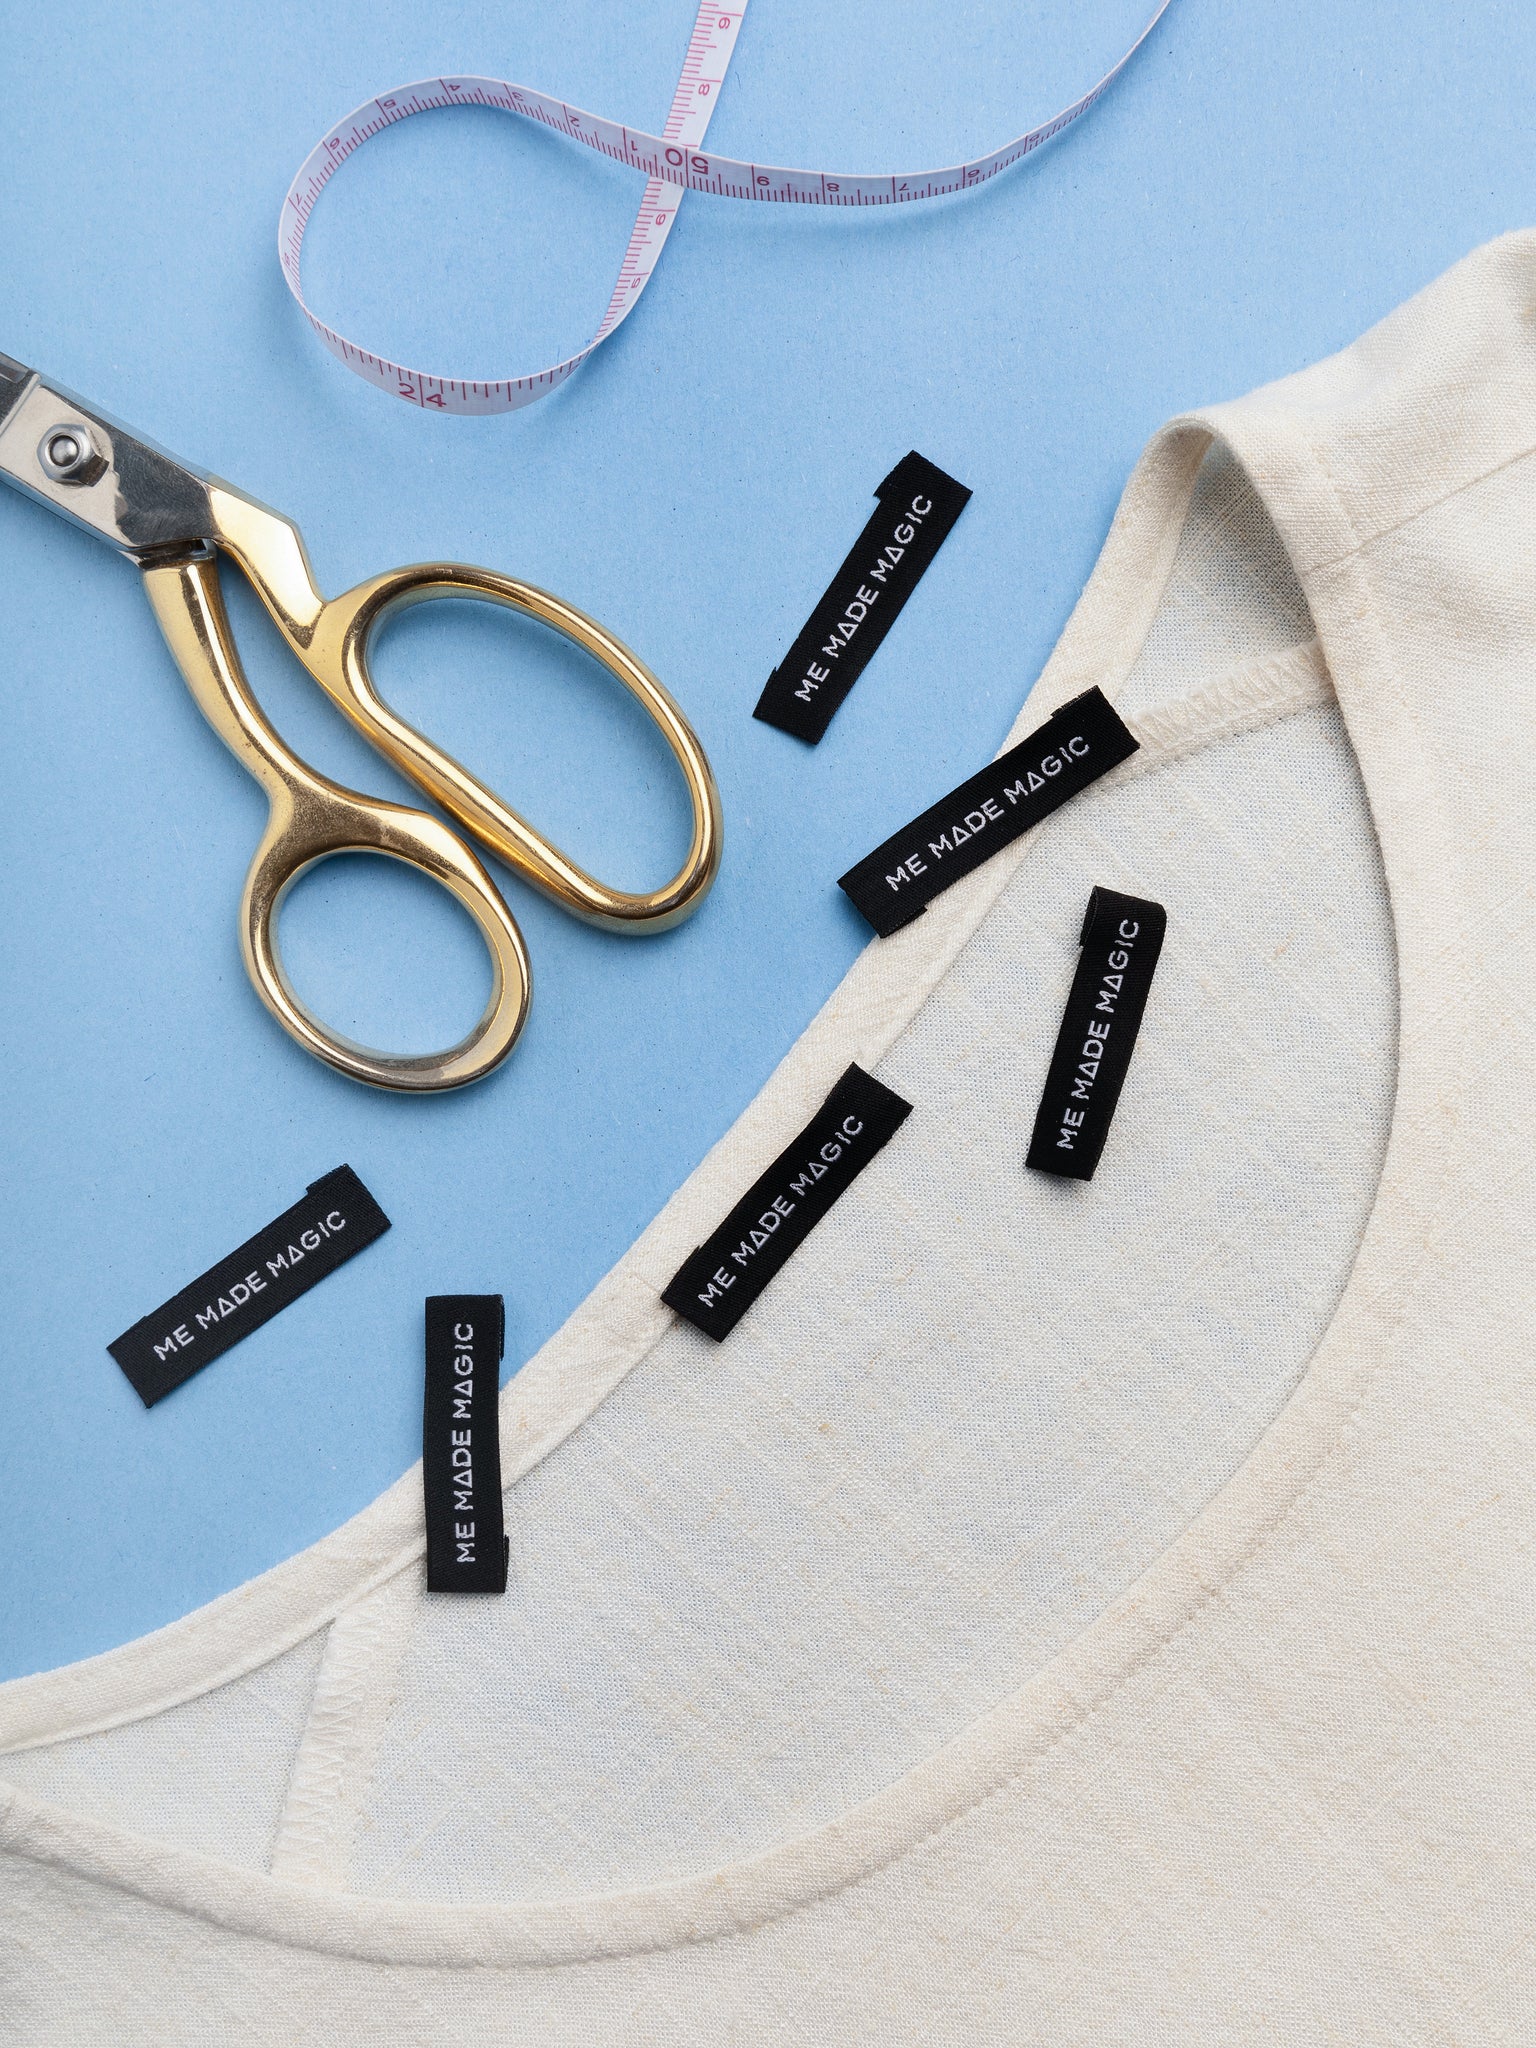 Core Fabrics Sewing Labels: 6 pack - Future Heirloom